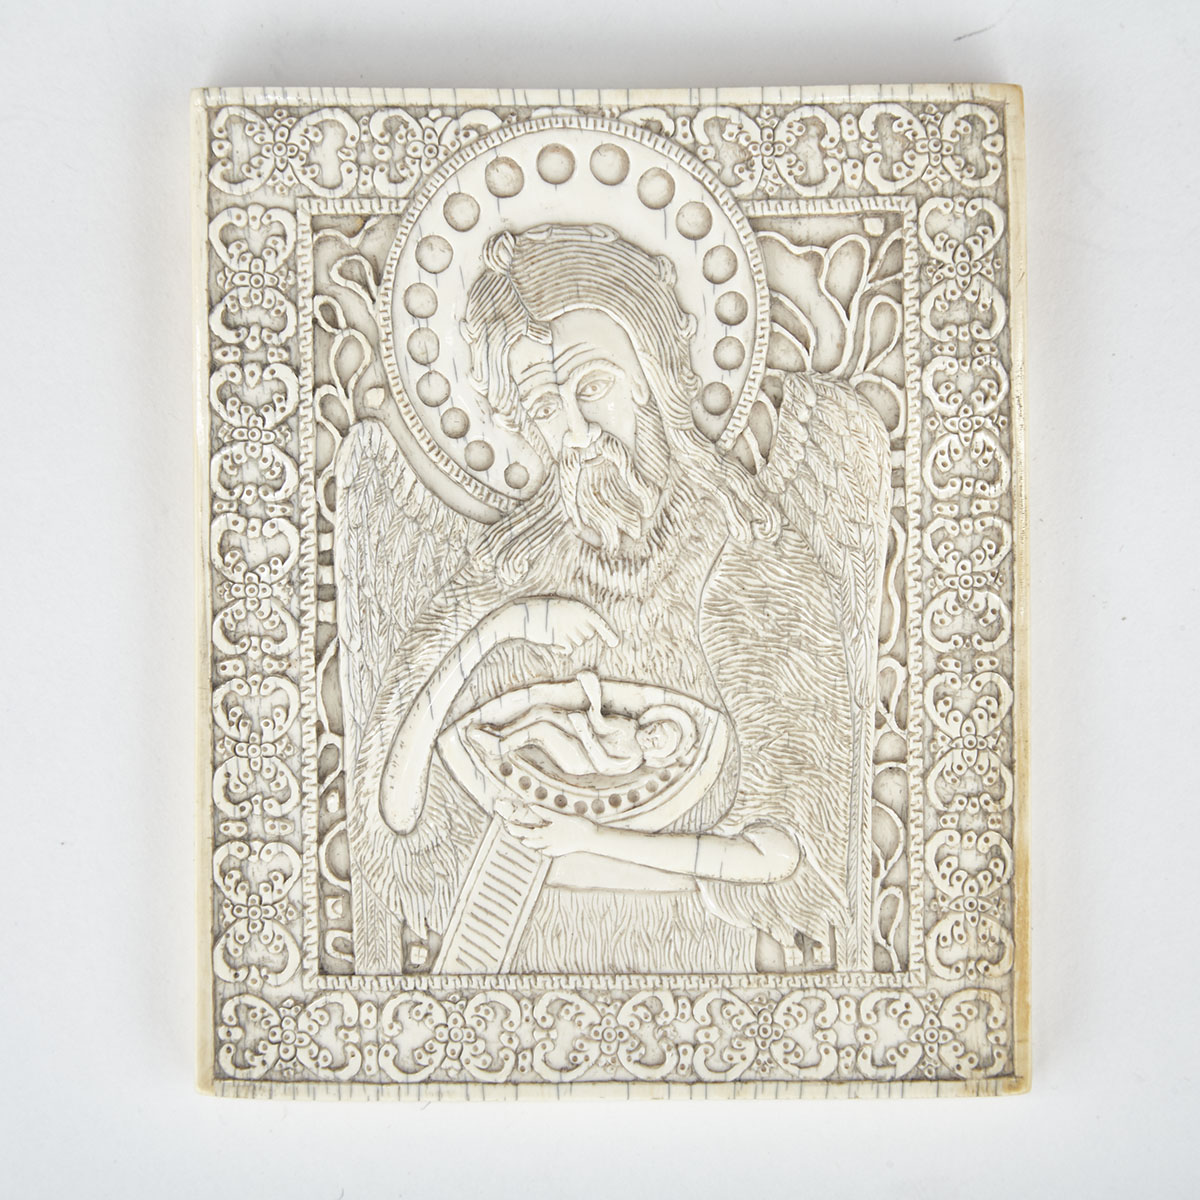 Russian Relief Carved Bone Icon, Kholmogory, 19th century